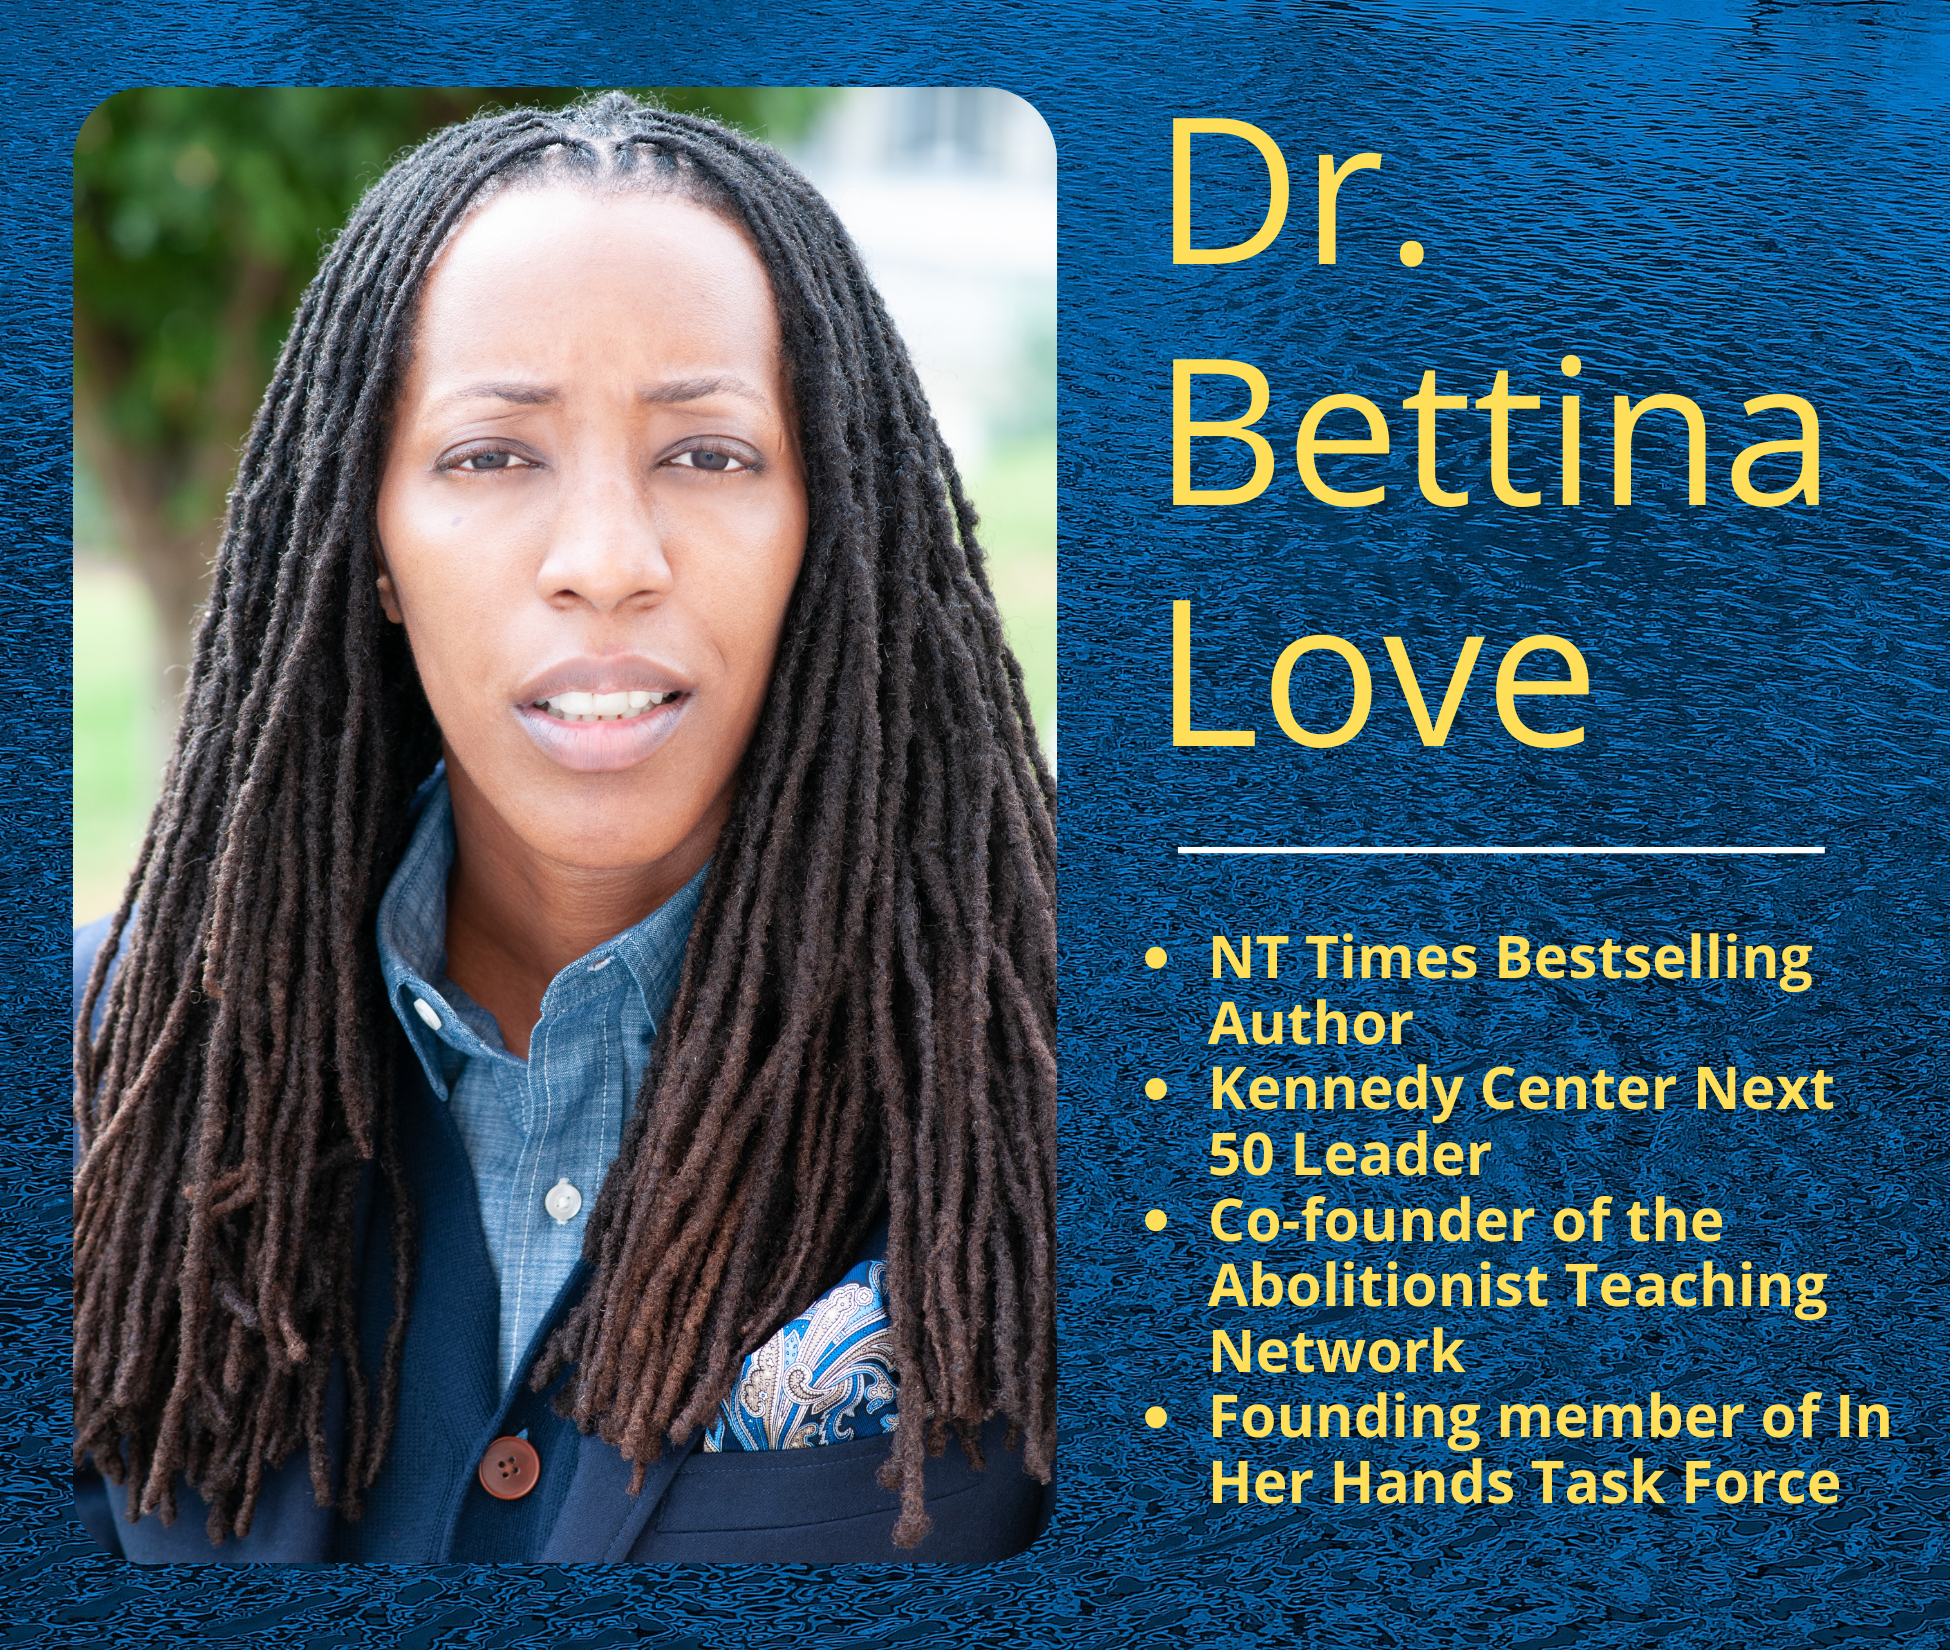 Dr. Bettina Love, renowned advocate for social justice in public education